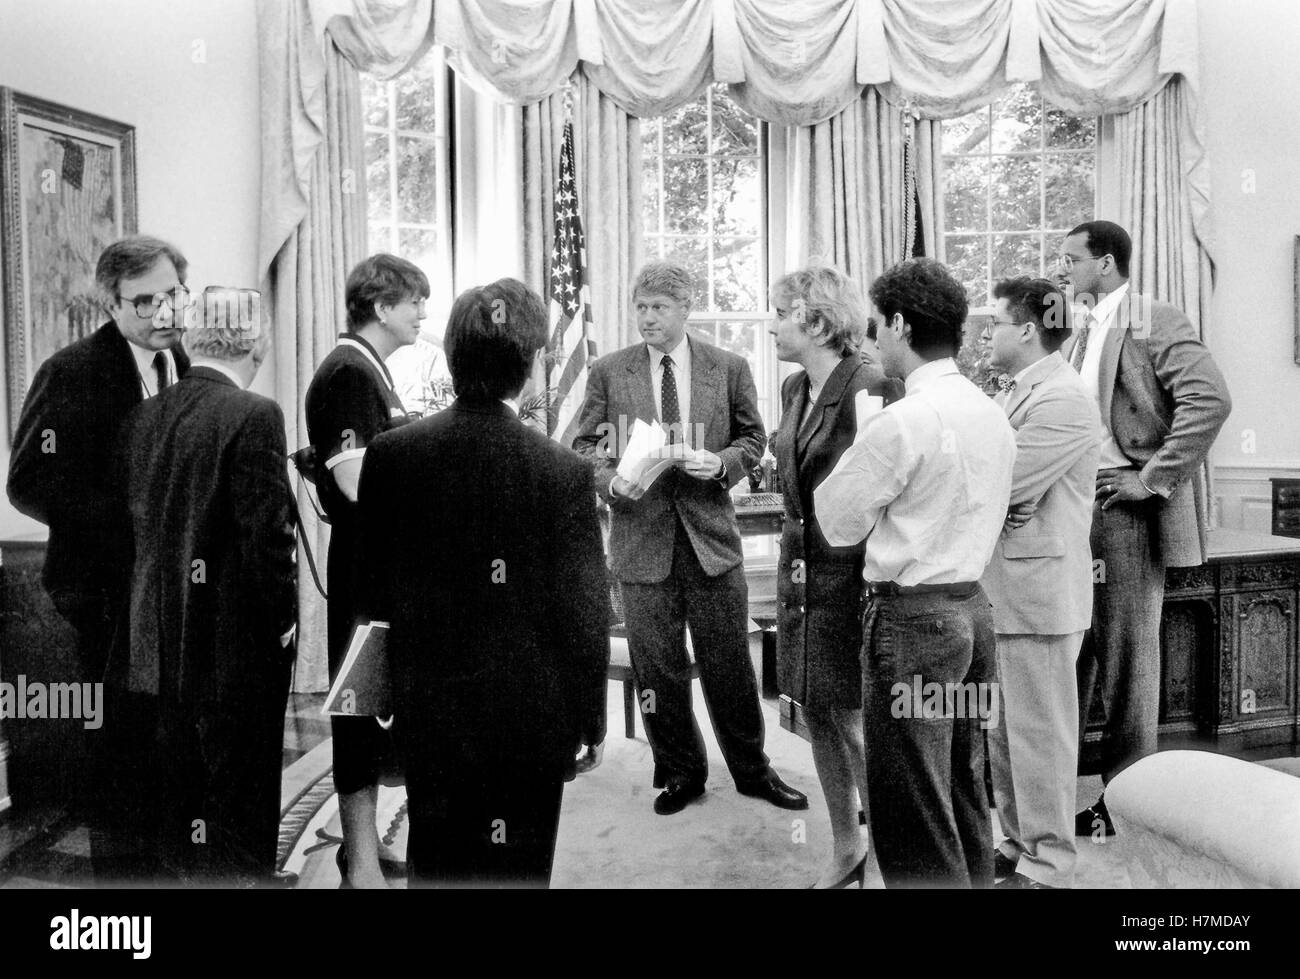 Washington, District of Columbia, USA. 26th Feb, 2008. United States President Bill Clinton meets with Attorney General Janet Reno in the Oval Office of the White House in Washington, DC on Thursday, June 24, 1993. White House Counsel Vince Foster, far left, is whispering into the ear of fellow counsel Bernard Nussbaum. Press Secretary Dee Dee Myers is at the immediate right of The President.Credit: White House via CNP © White House/CNP/ZUMA Wire/Alamy Live News Stock Photo